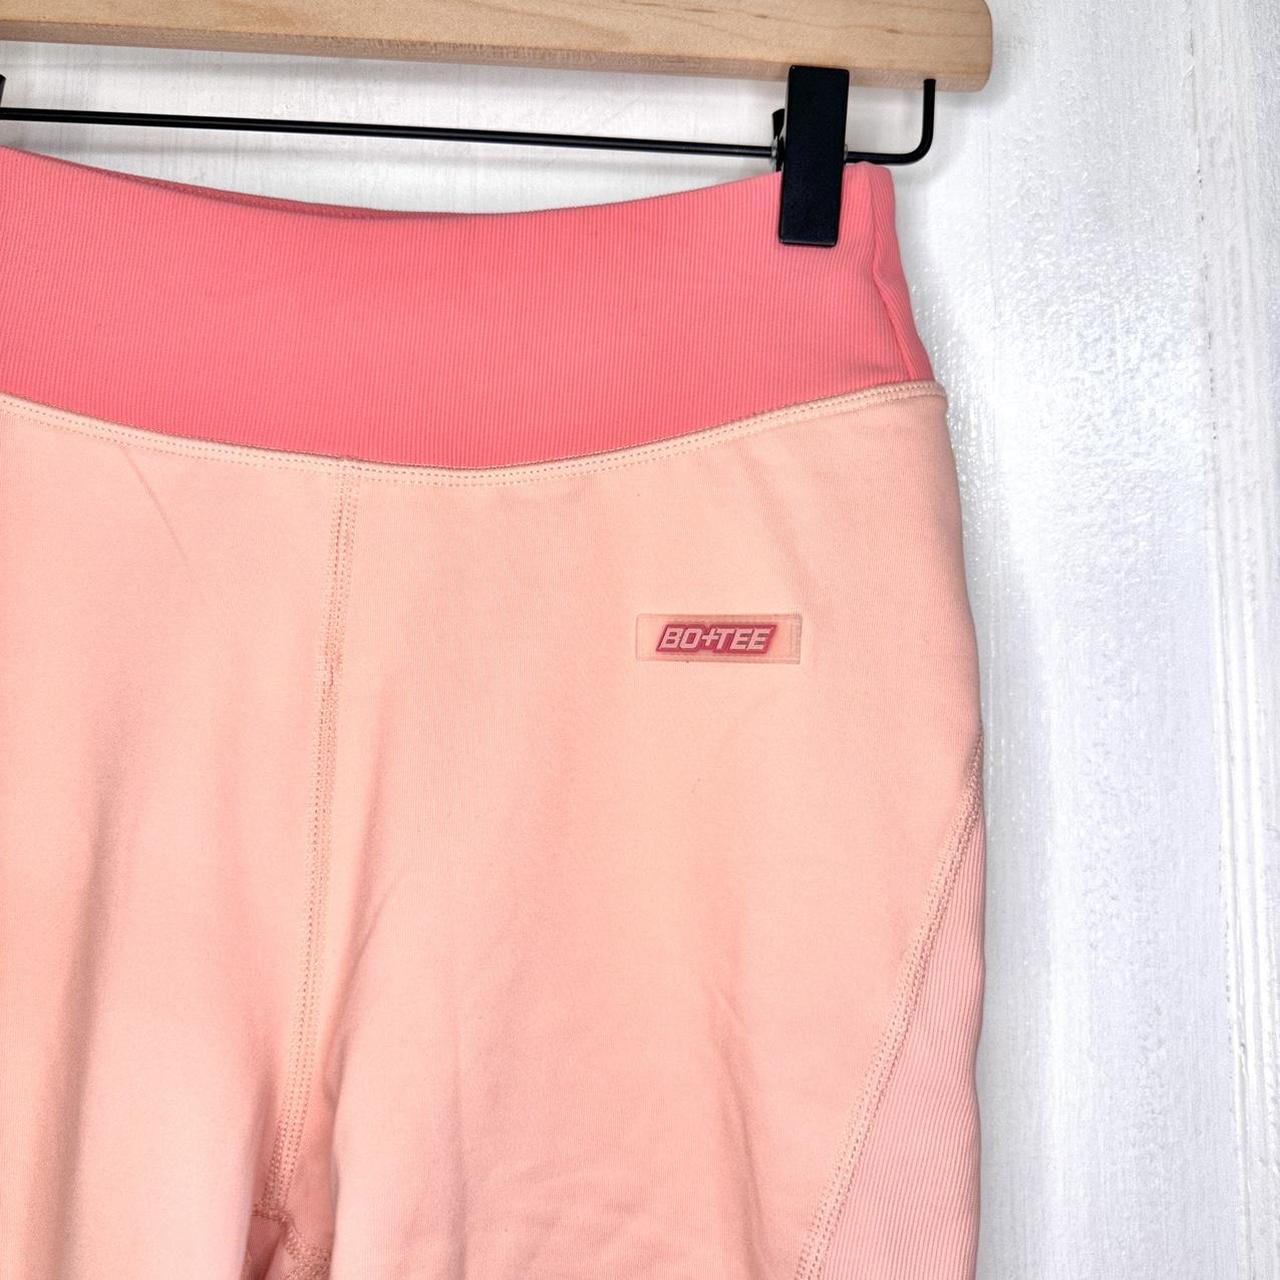 Bo + tee Contrast Waist Cycling Shorts In Pink XS